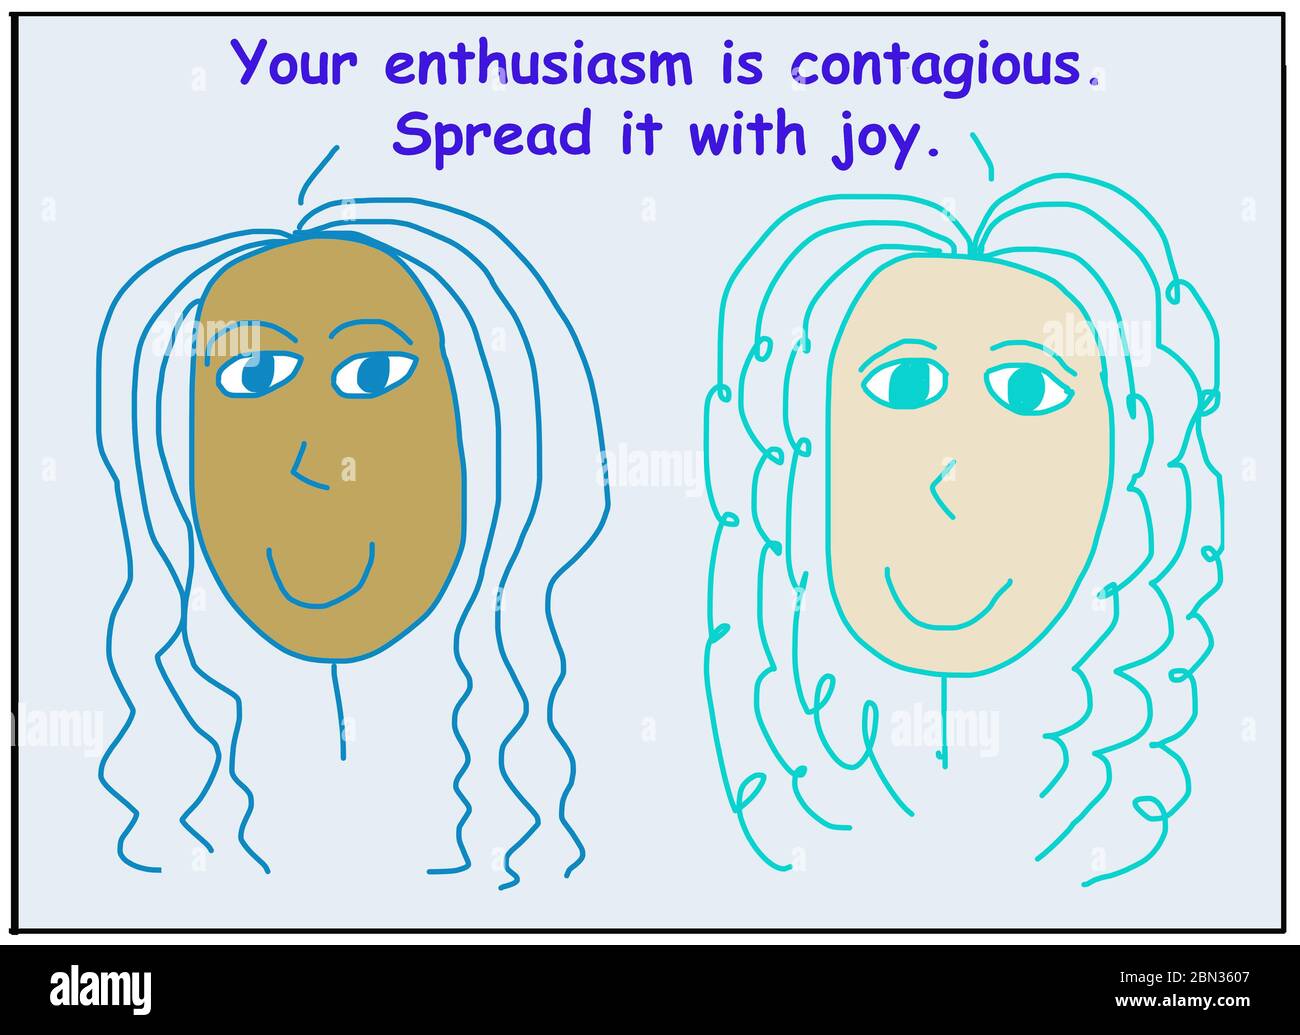 Color cartoon of two smiling and ethnically diverse women who are saying your enthusiasm is contagious, spread it with joy. Stock Photo